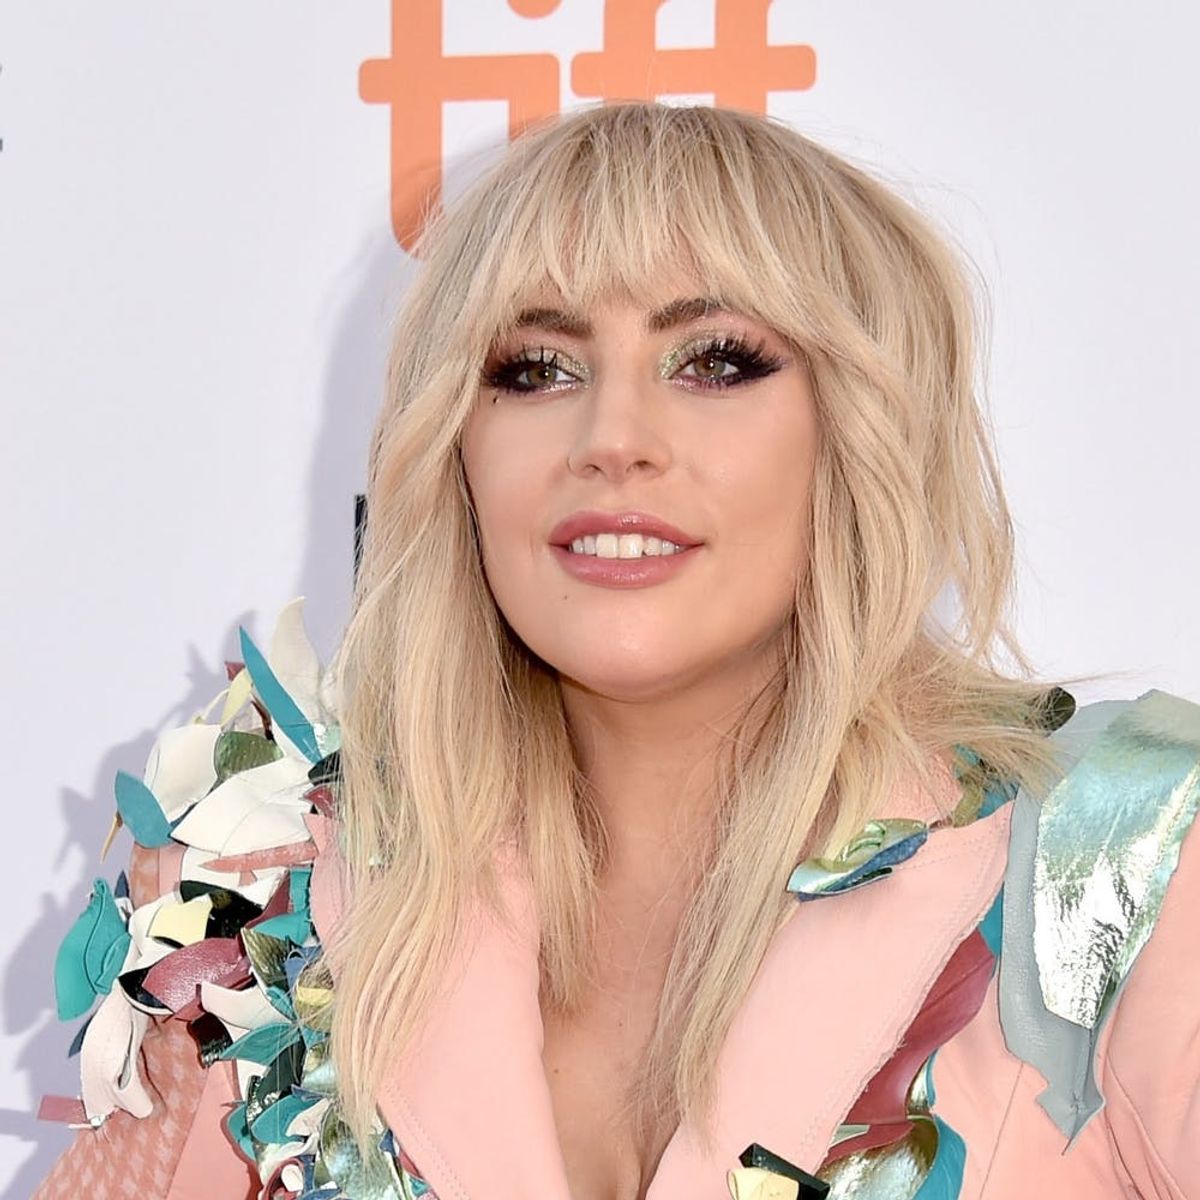 10 Must-See Moments from Lady Gaga’s Netflix Documentary “Gaga: Five Foot Two”